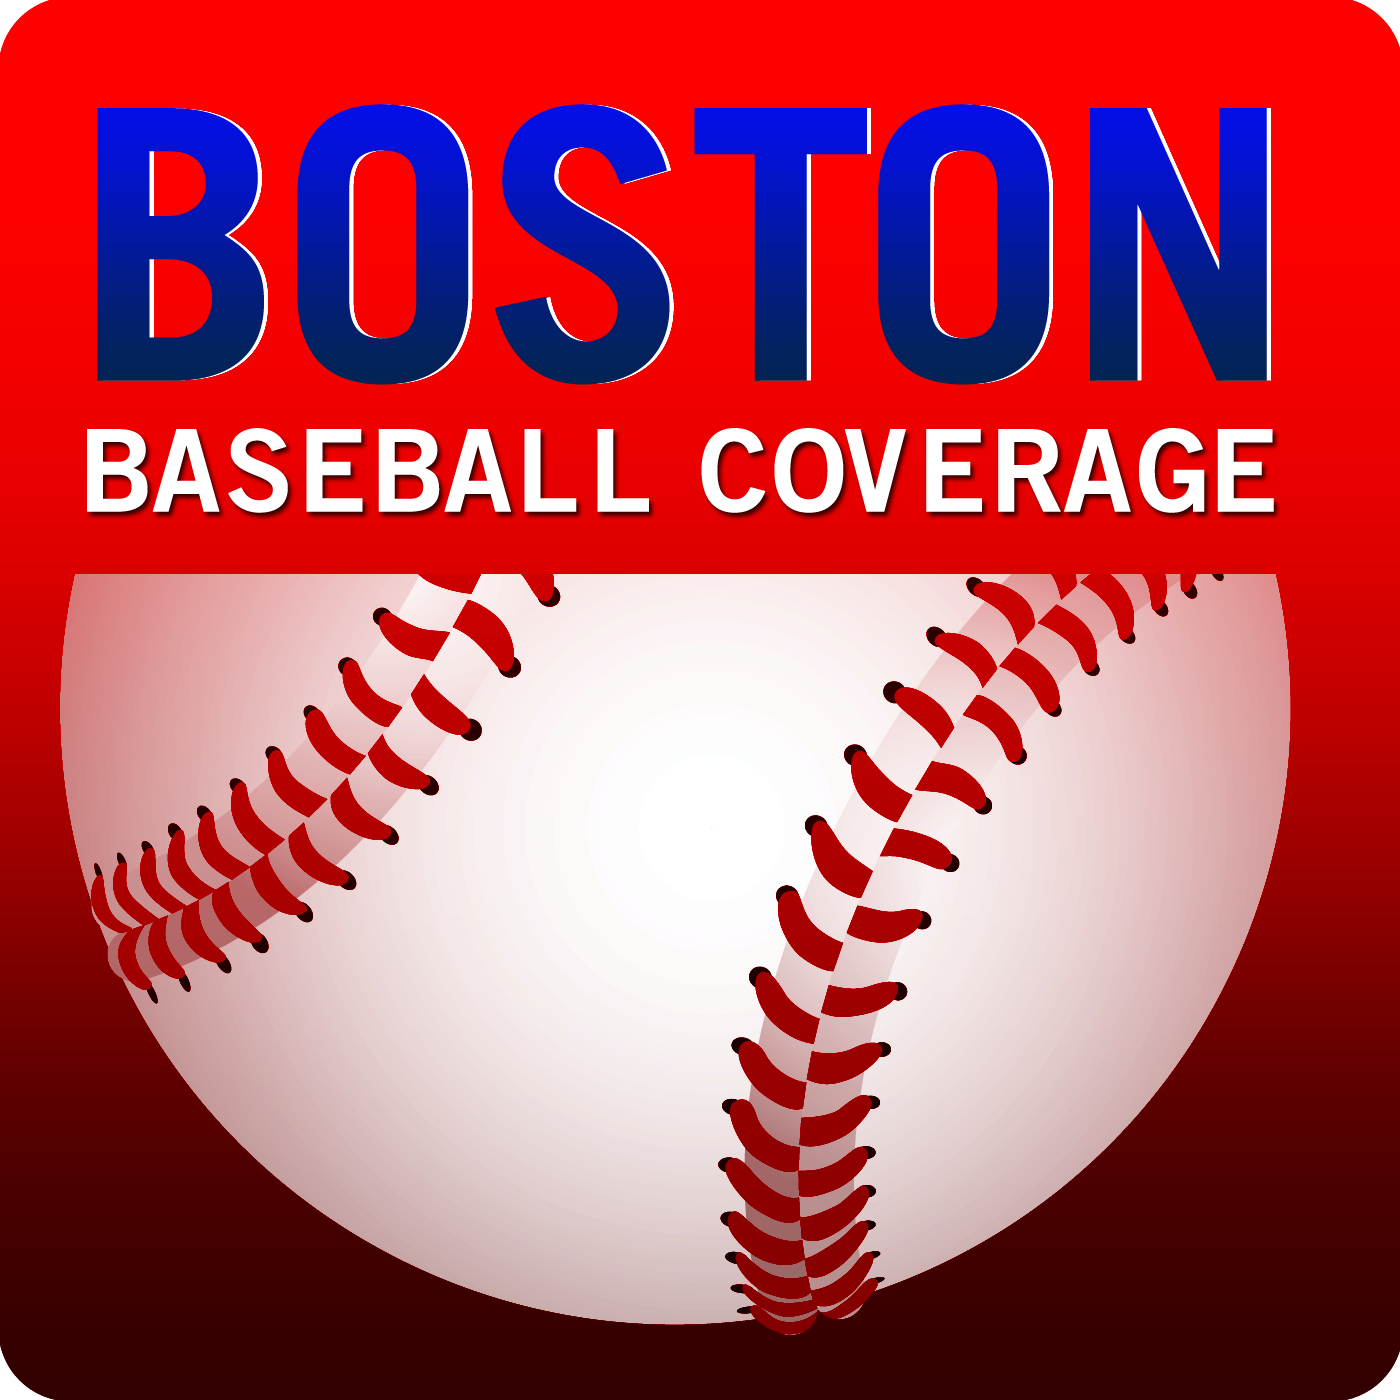 WEEI's Red Sox Insider Lou Merloni on why the Sox should avoid a rental at the trade deadline